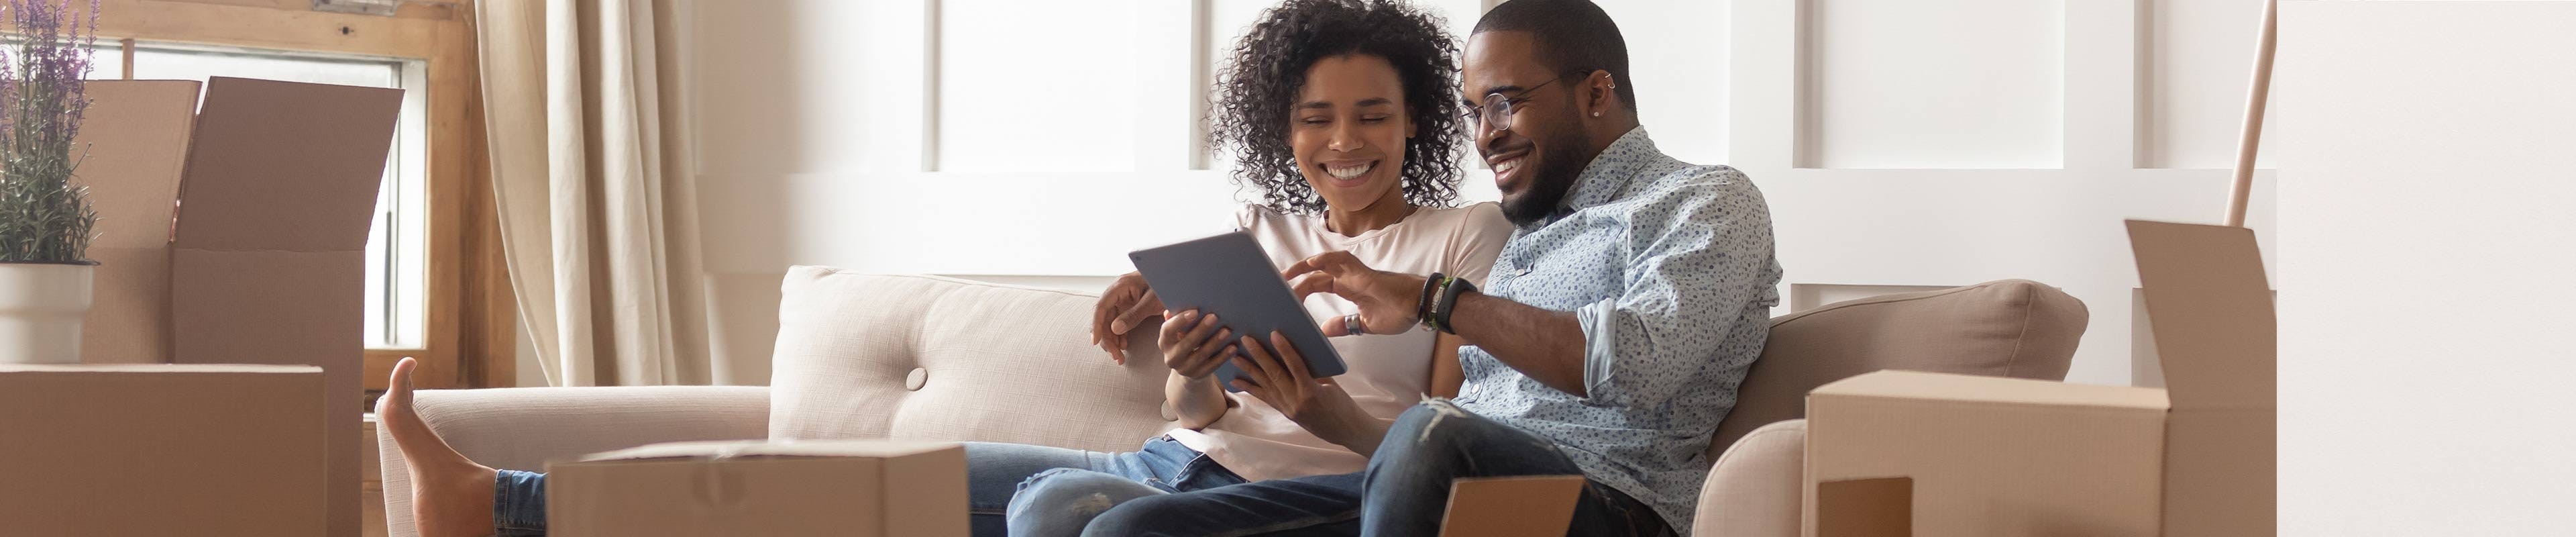 Image of a couple looking online after moving into a new home.